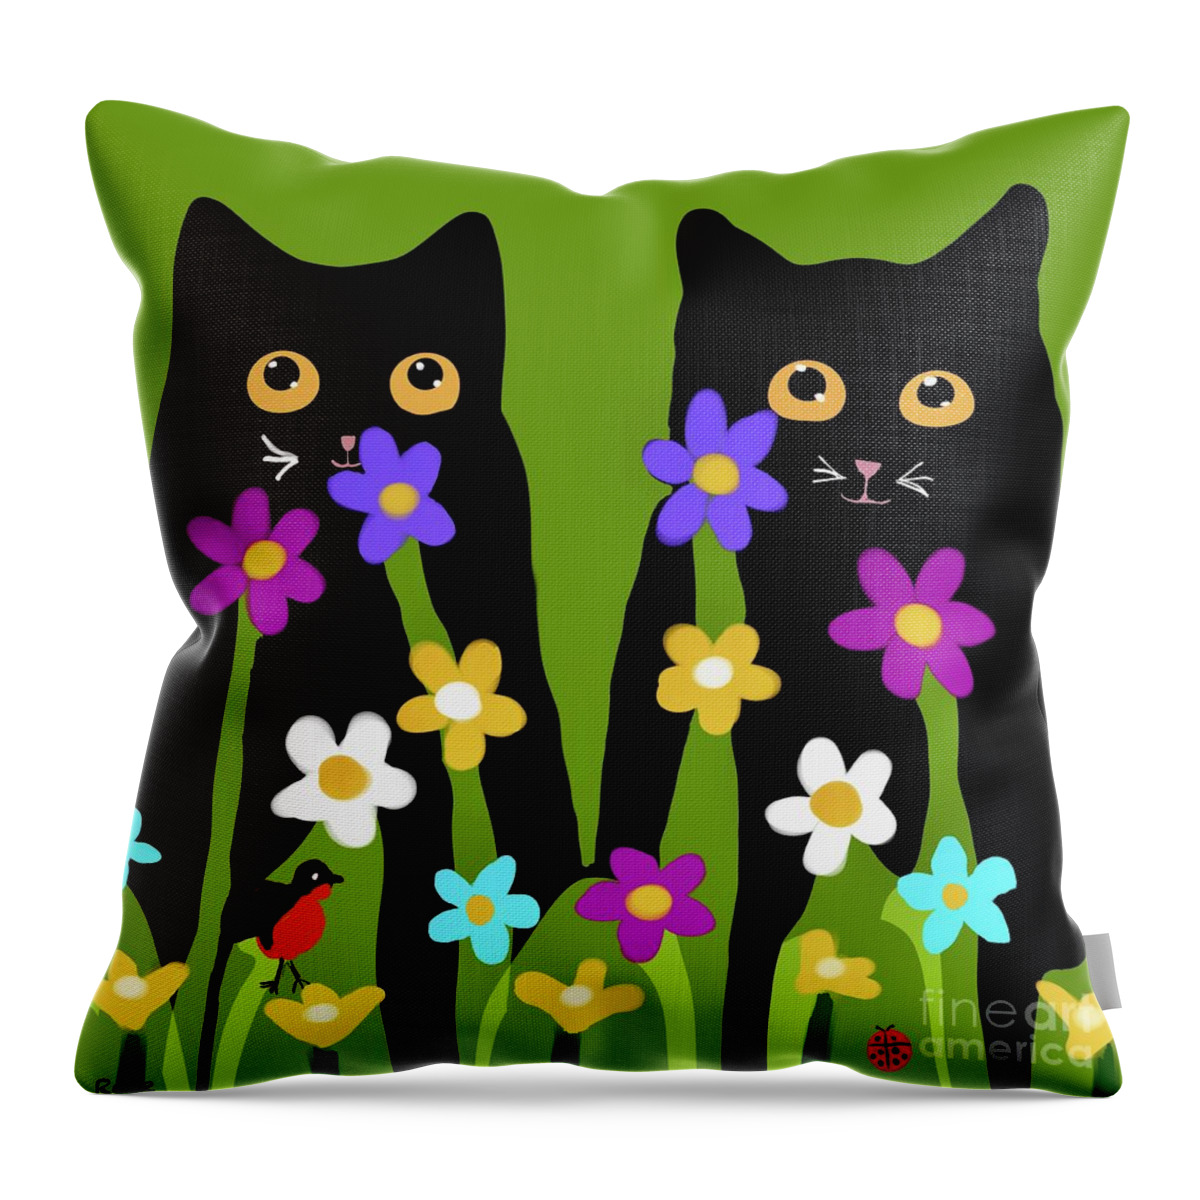 Two Black Cats Throw Pillow featuring the digital art Hiding in the flower bed by Elaine Hayward